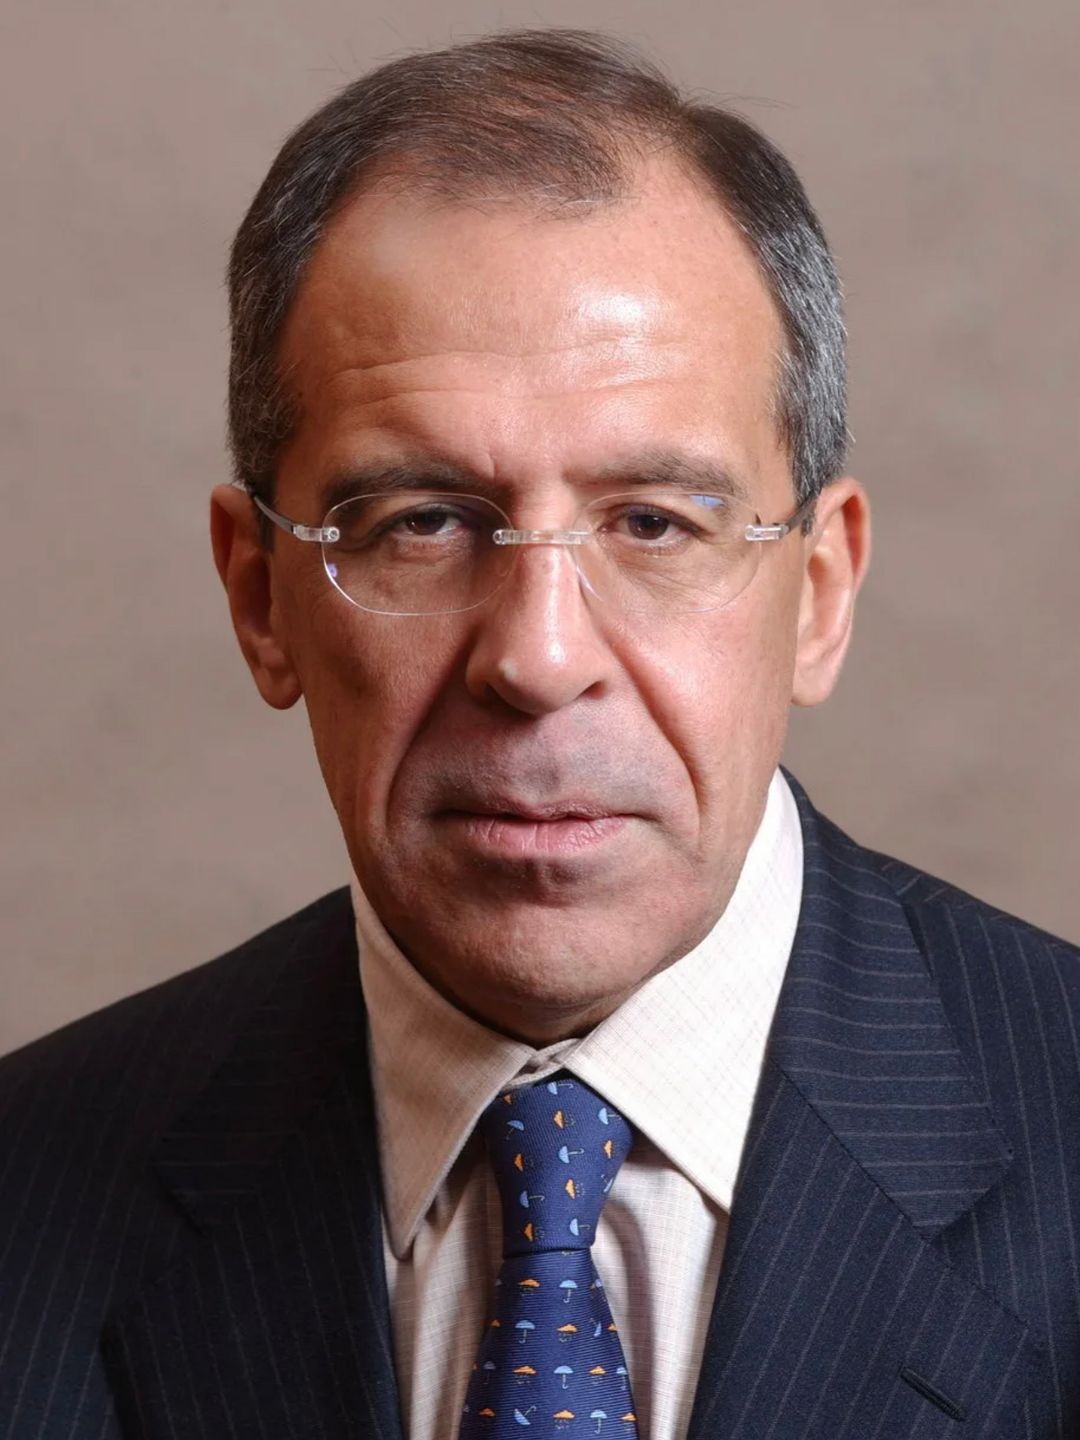 Sergey Lavrov does he have a wife